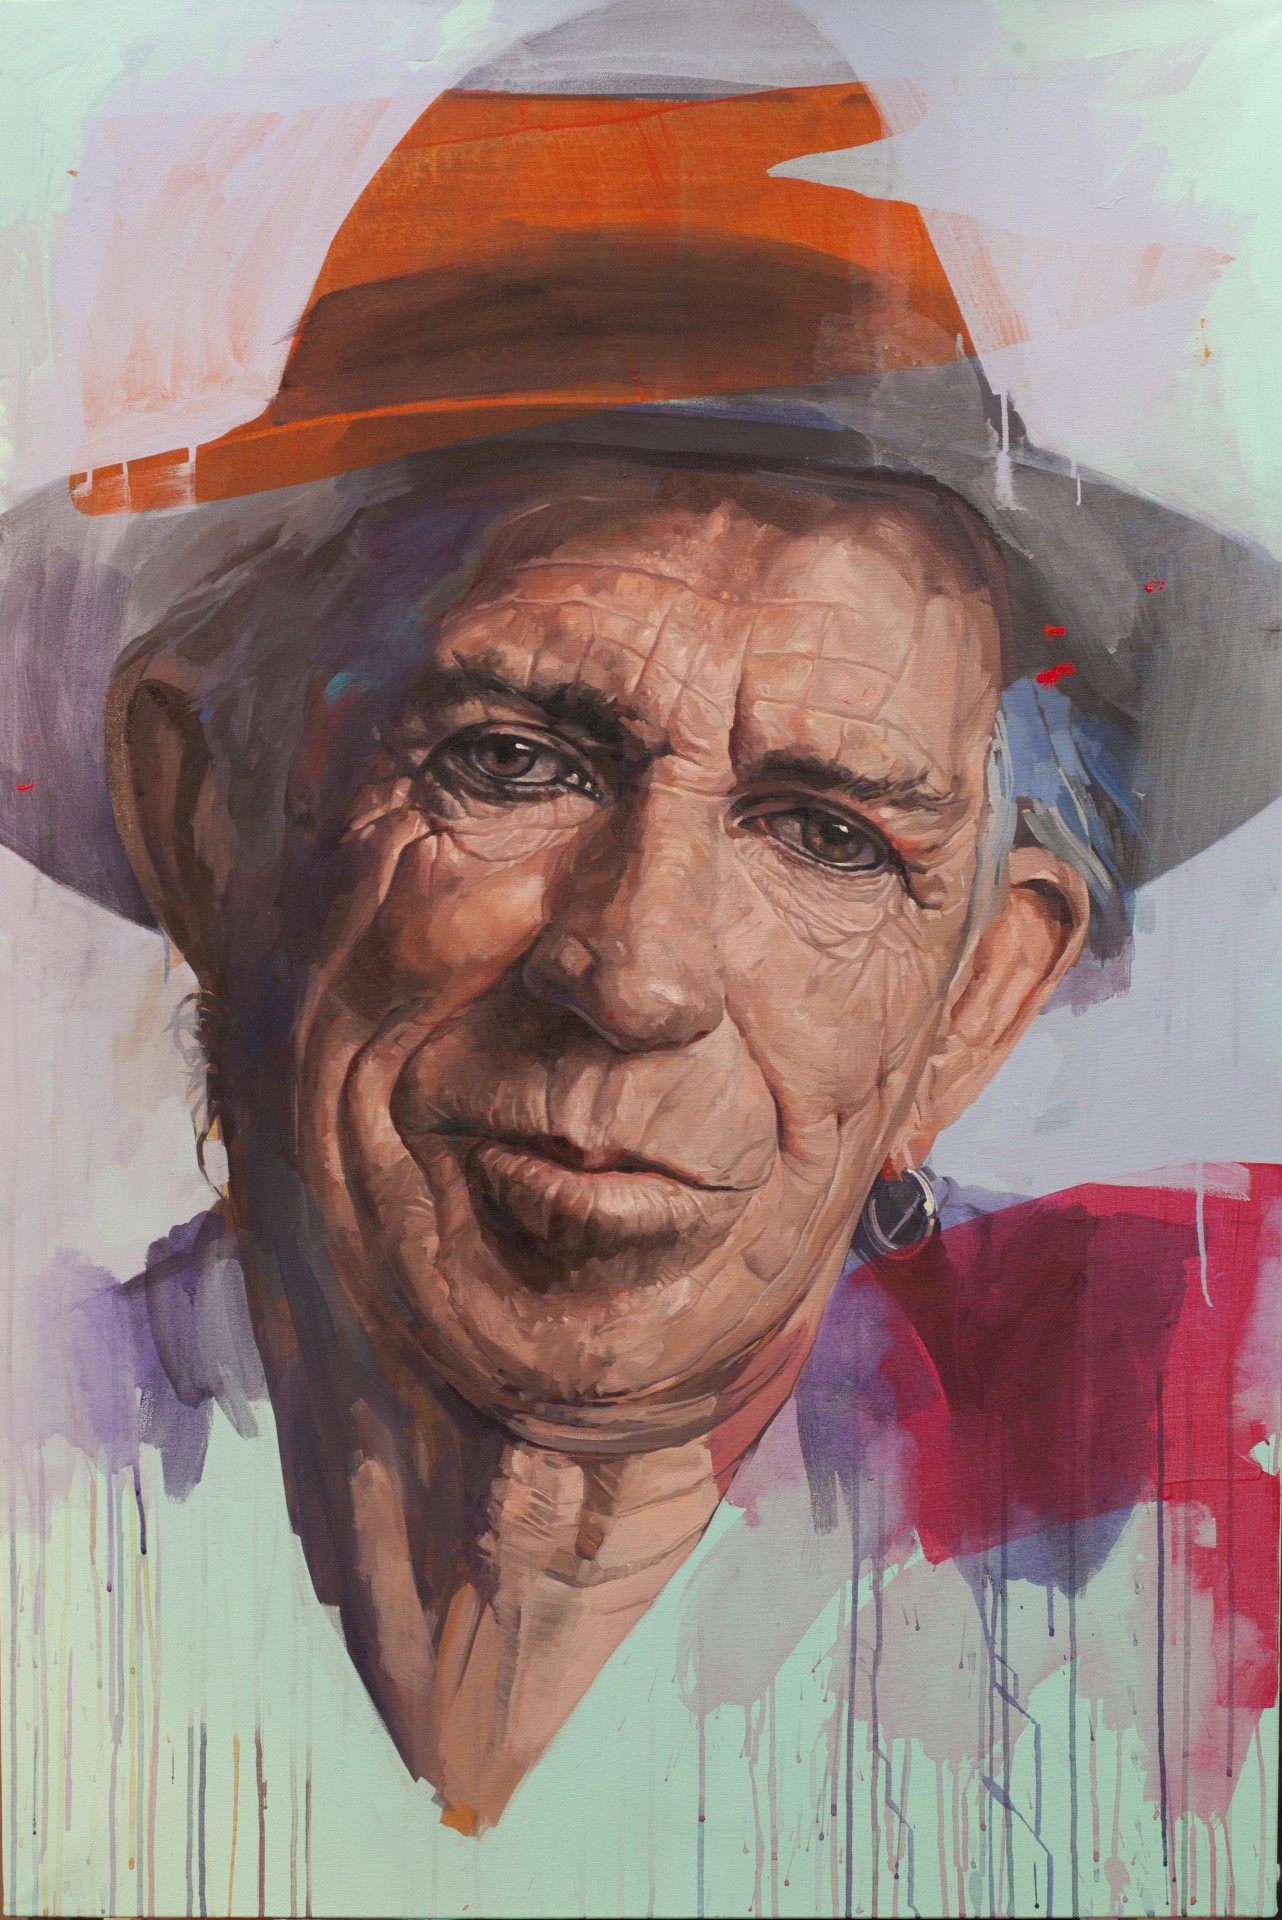 https://newmastersgallery.com/wp-content/uploads/2021/03/Rose-Keith-Richards-57x38-1.jpg